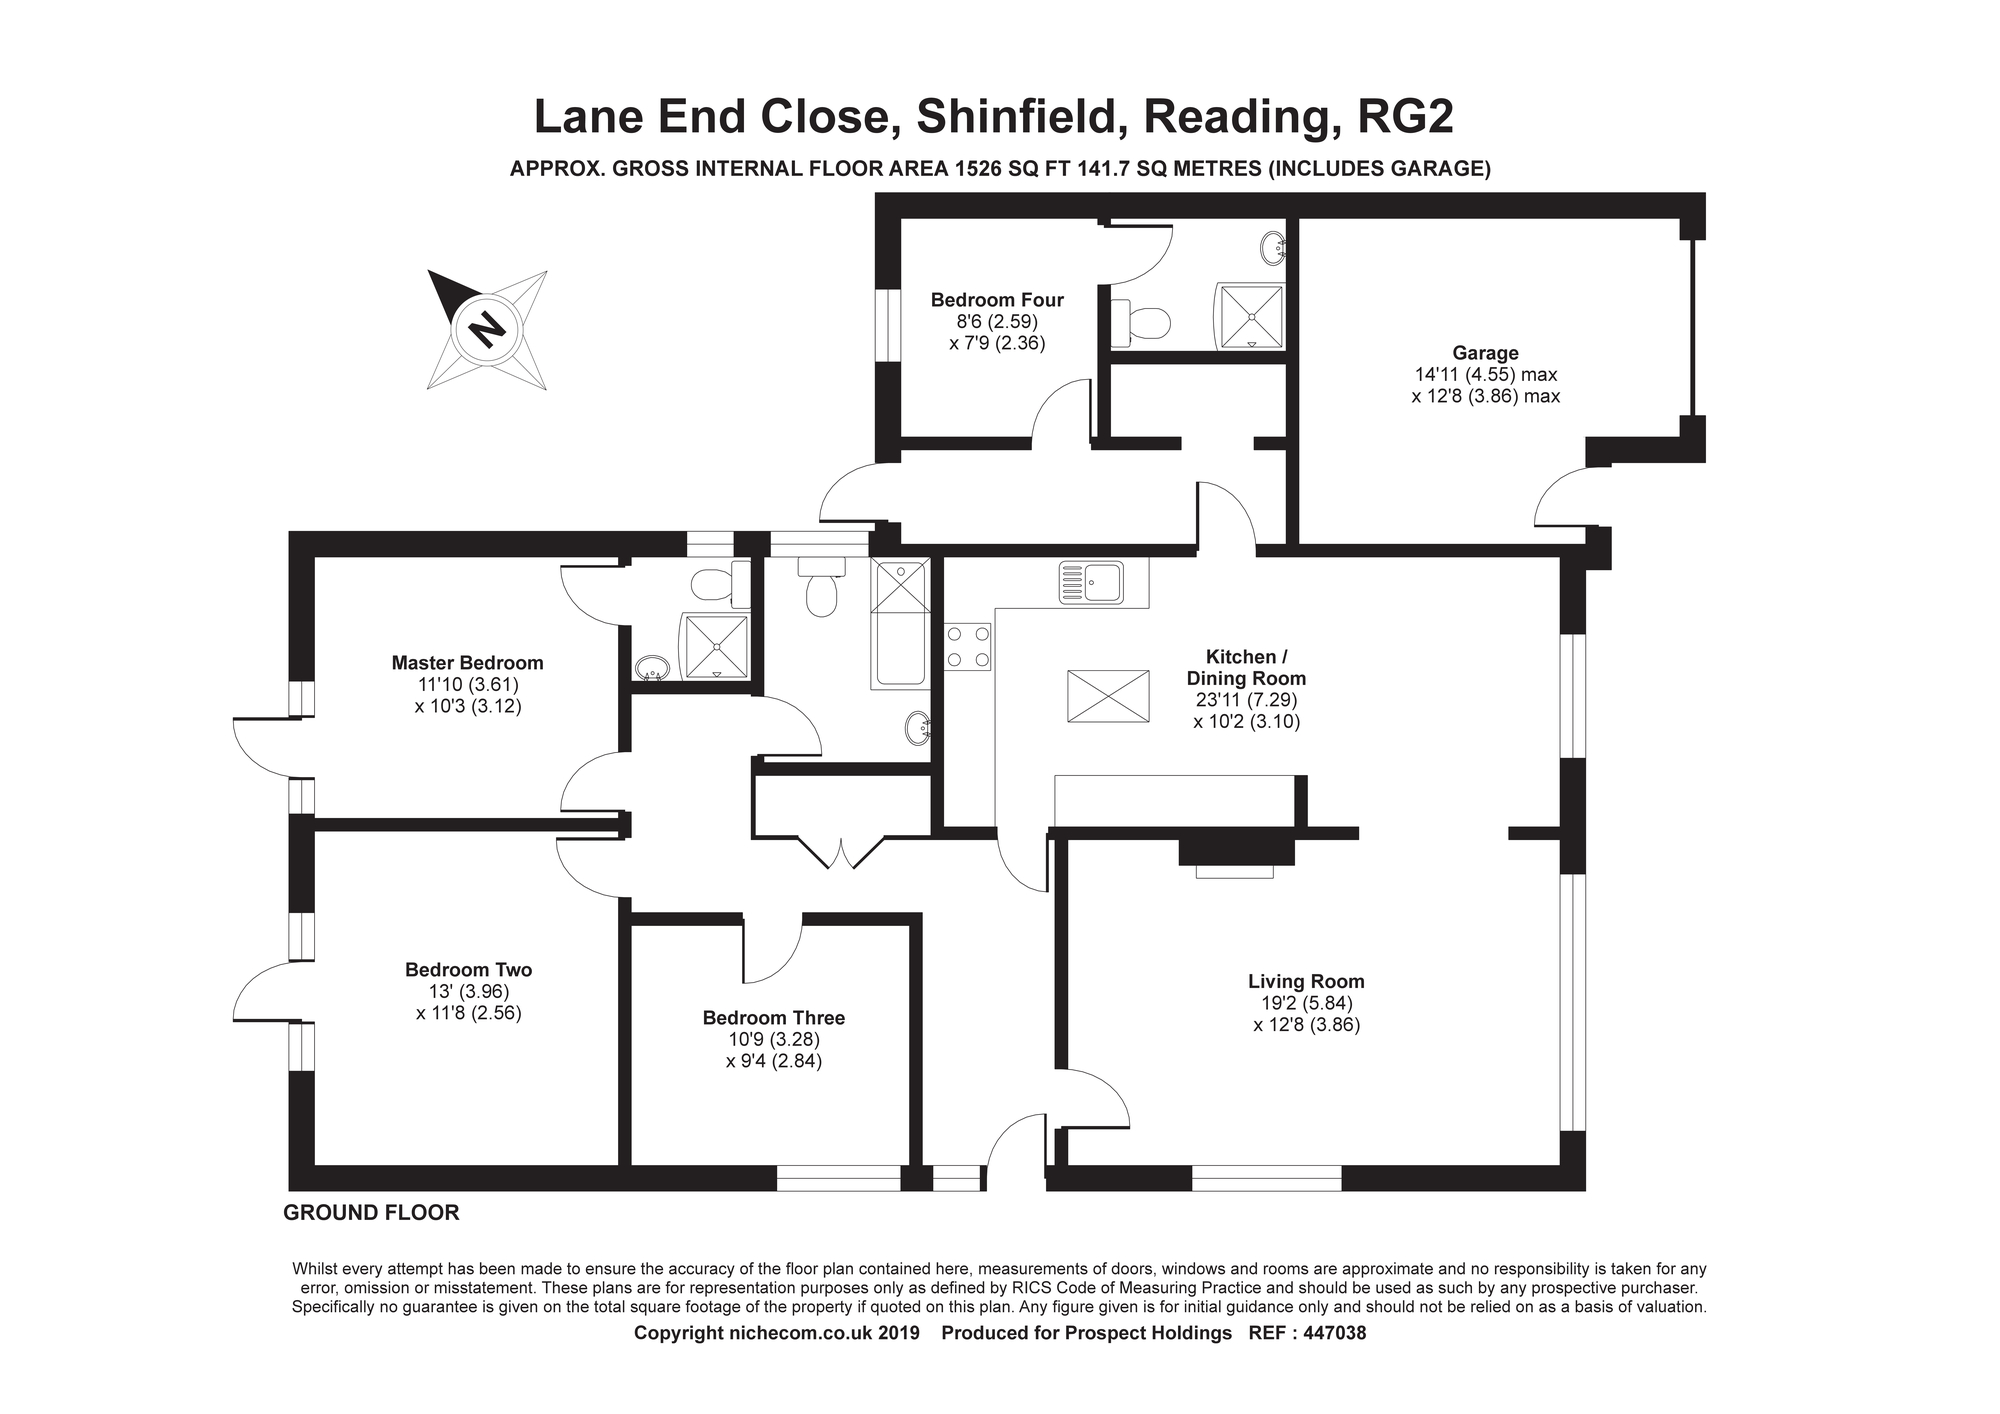 4 Bedrooms Detached bungalow for sale in Lane End Close, Shinfield, Reading, Berkshire RG2